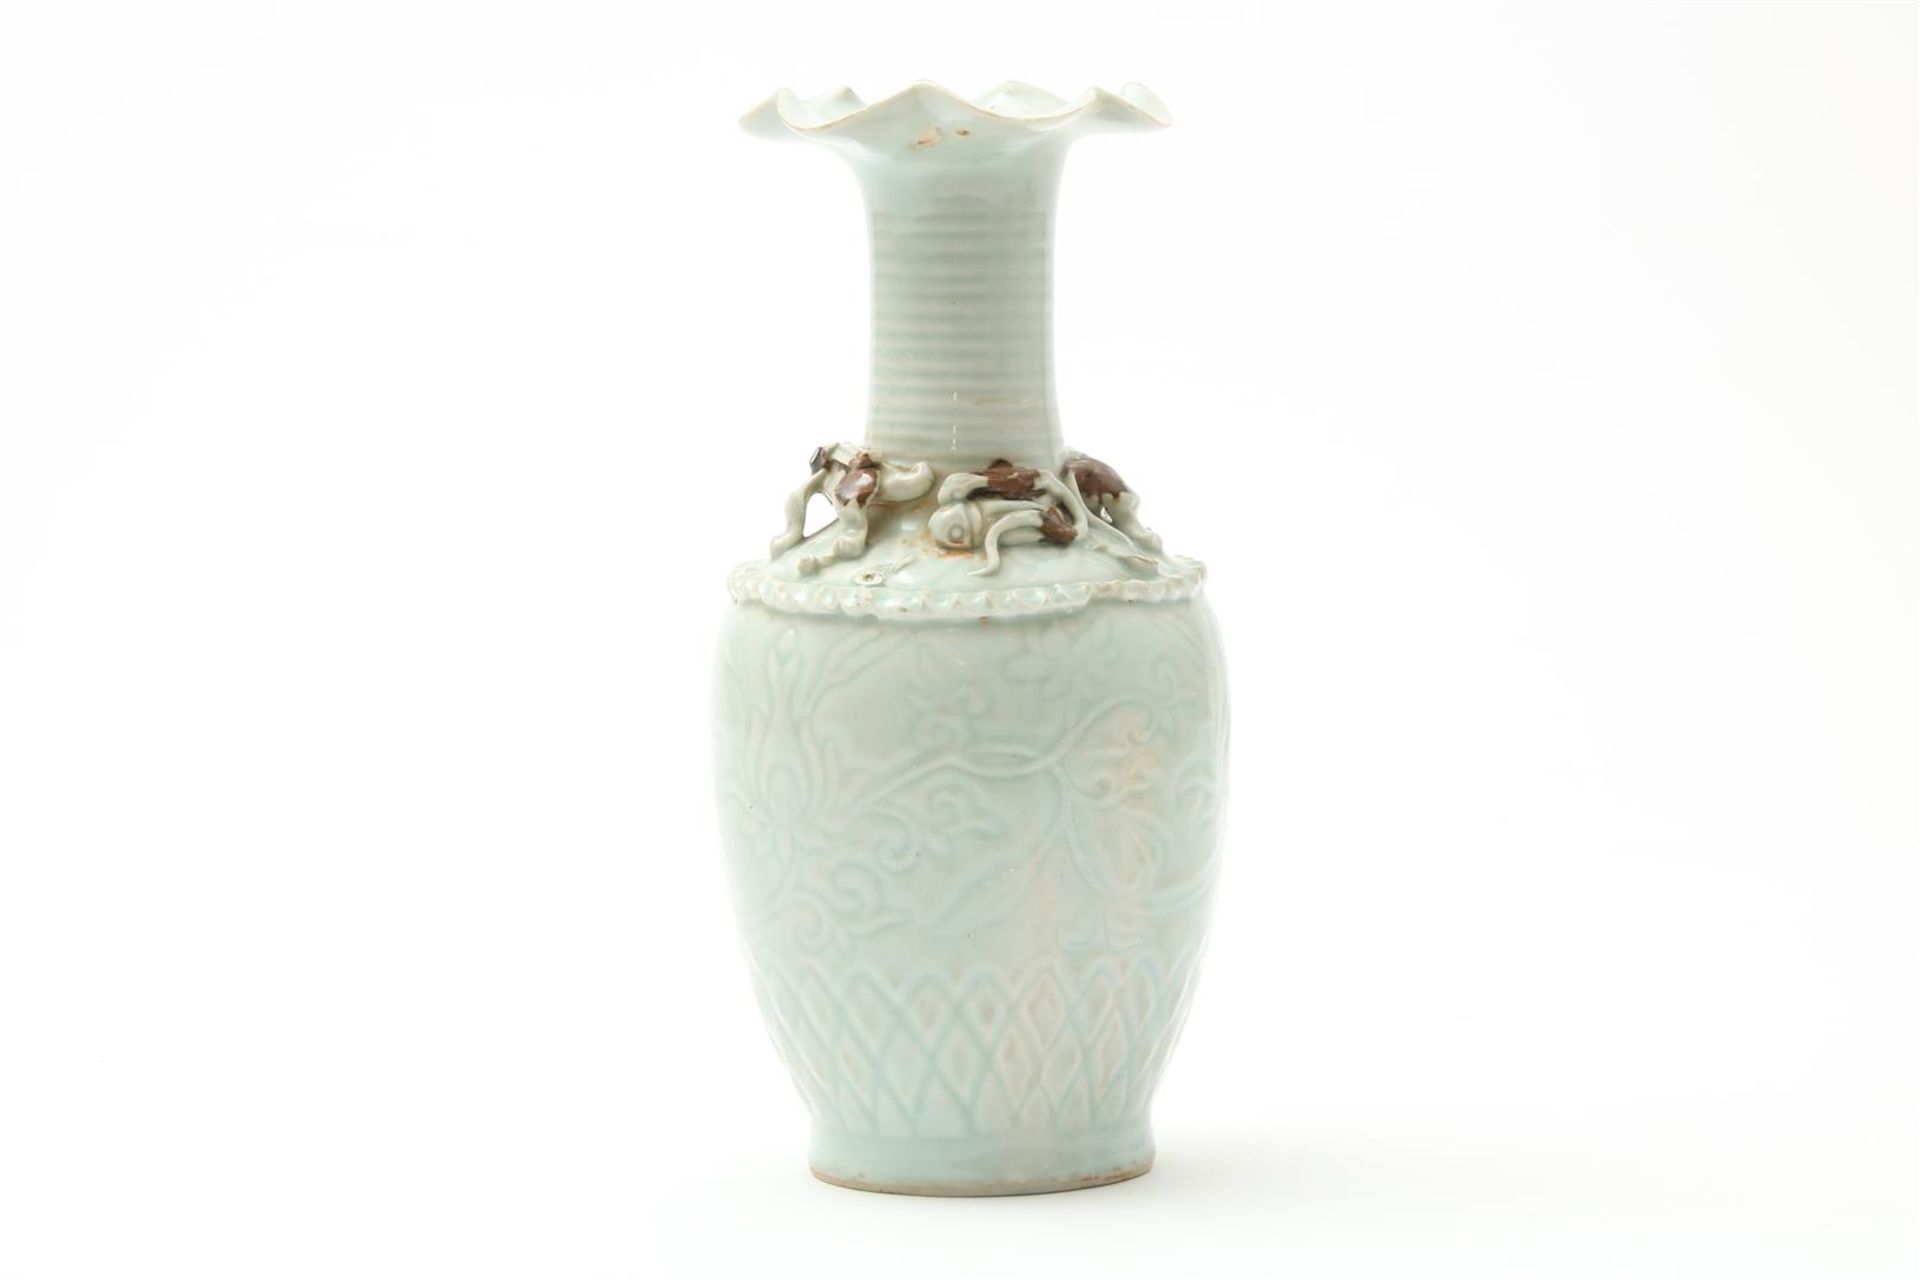 Porcelain vase with celadon glaze decorated with relief decor and imposed animals, China, h. 26